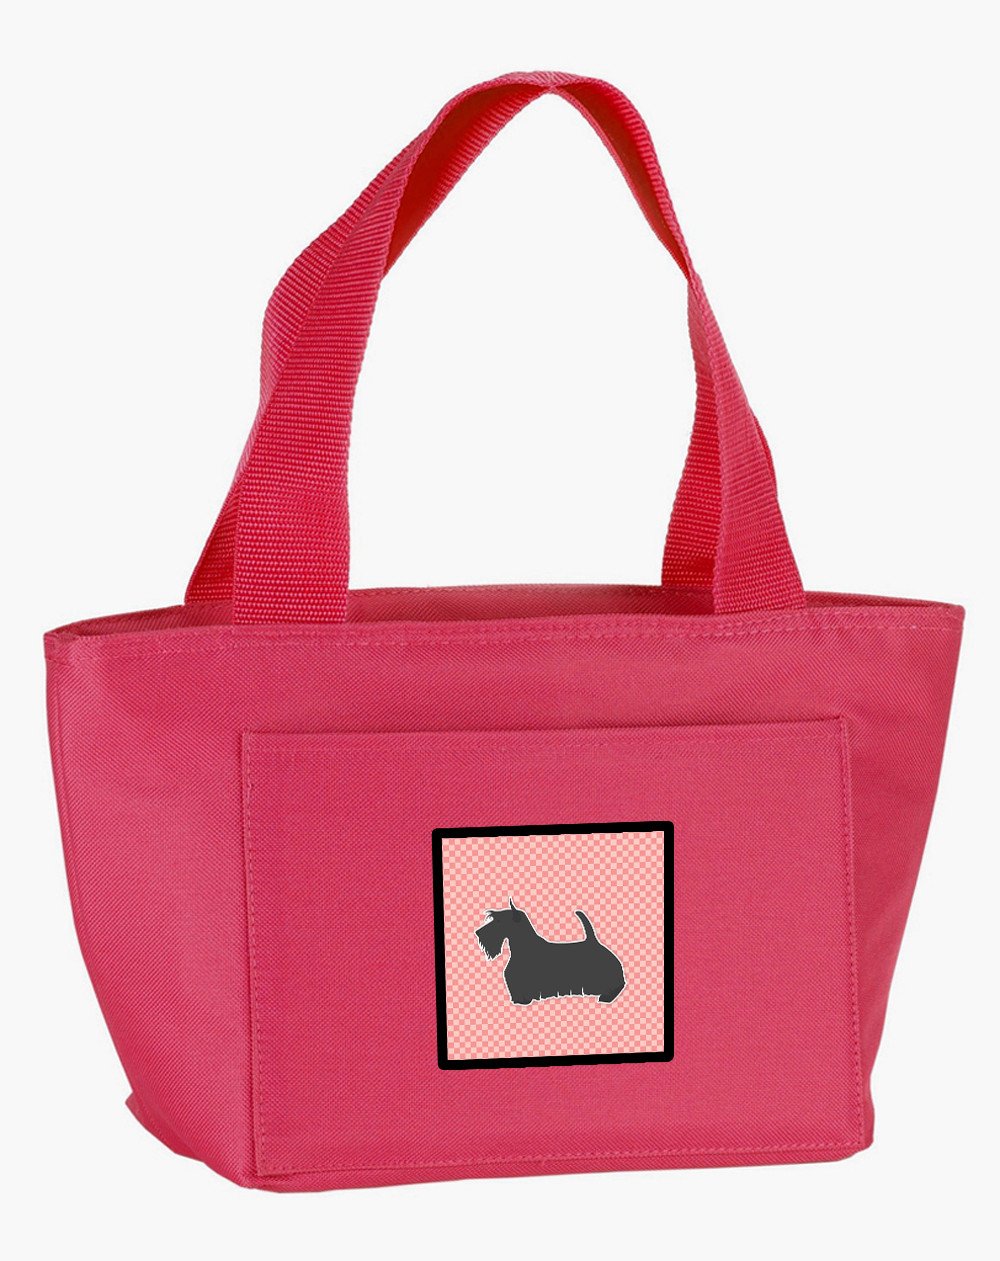 Scottish Terrier Checkerboard Pink Lunch Bag BB3669PK-8808 by Caroline's Treasures